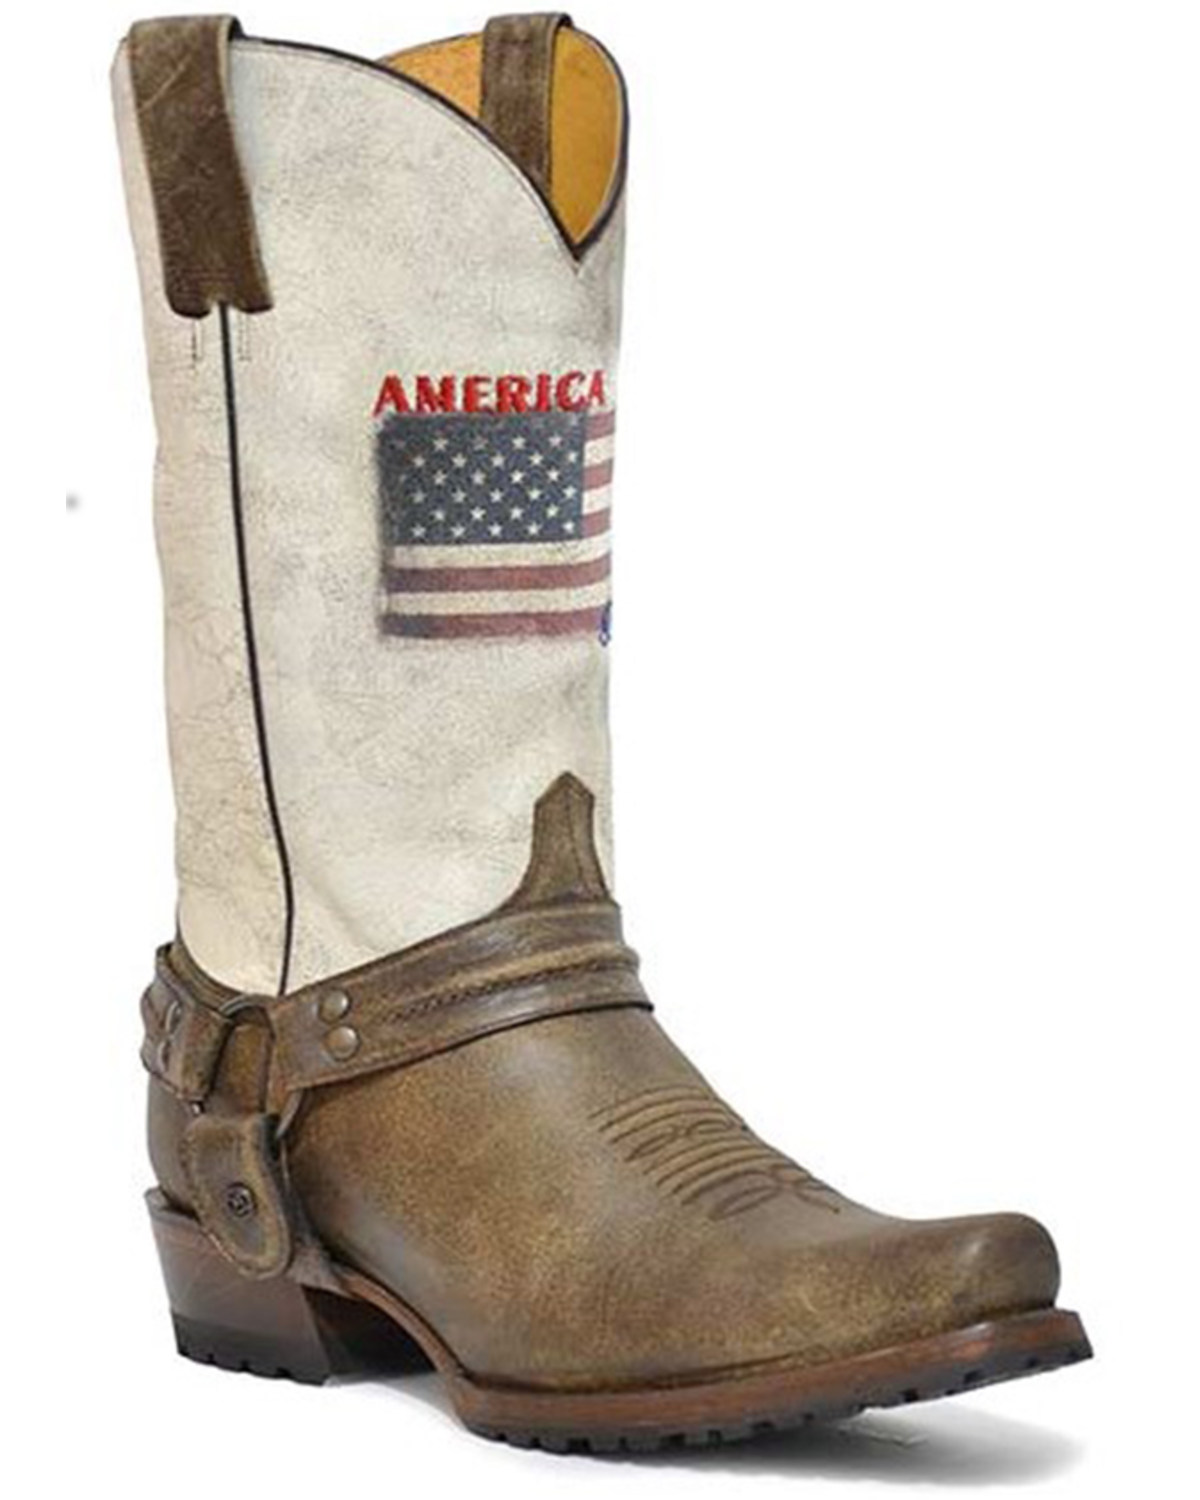 Roper Men's America Strong Motorcycle Boots - Square Toe